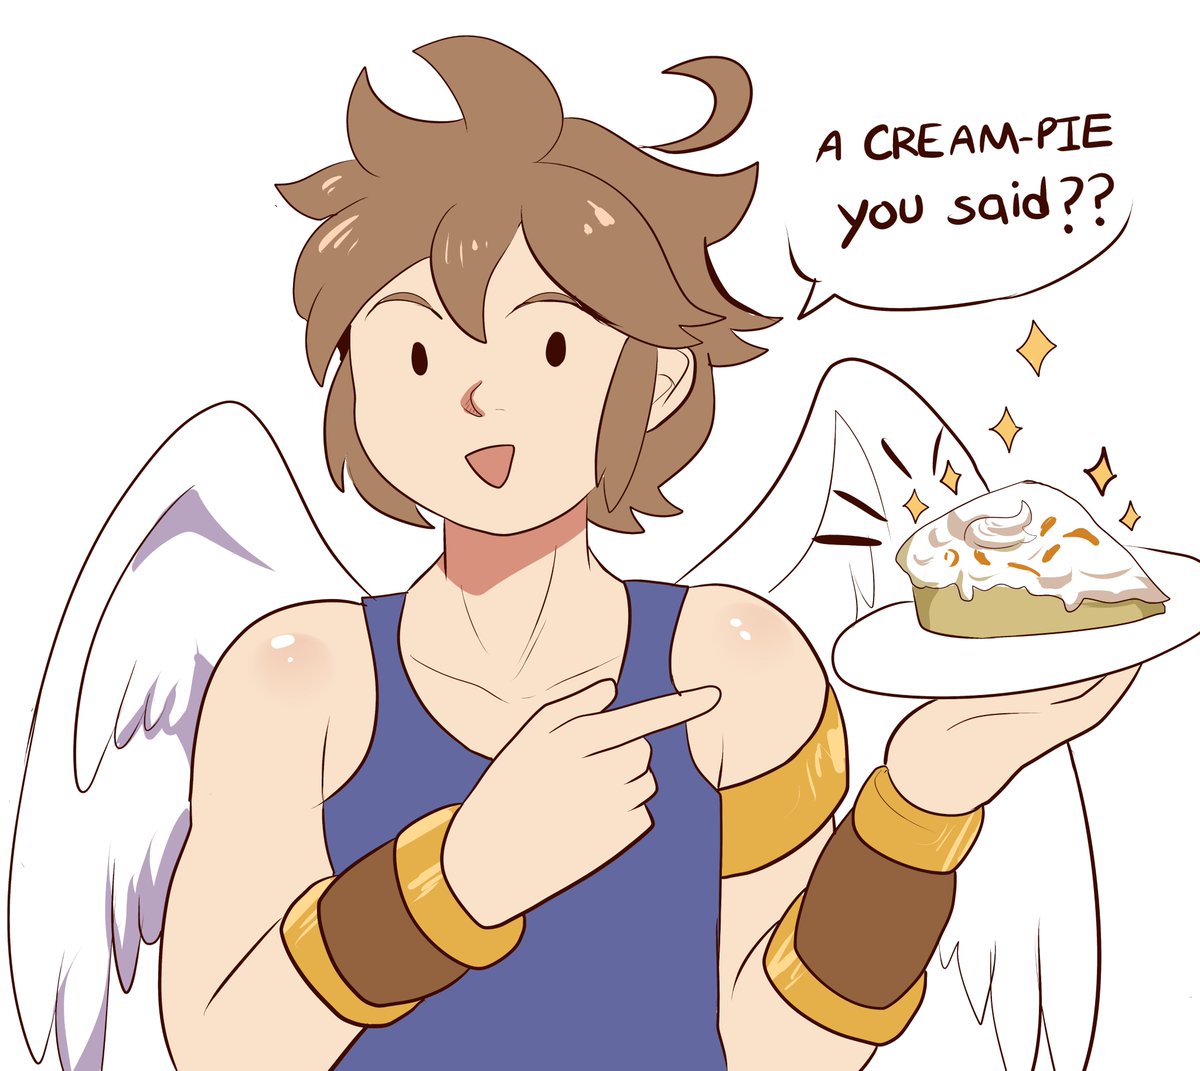 Pit being Pit part 2
A creampie she said...
#KidIcarus 